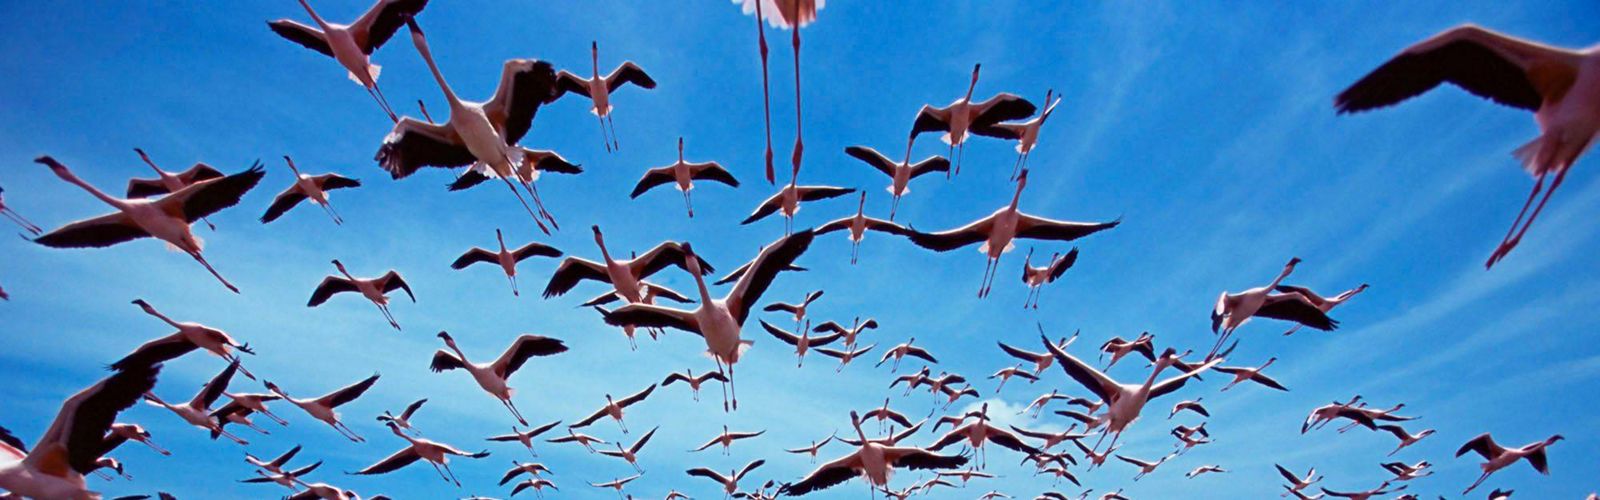 Flamingos flying above water under blue sky.